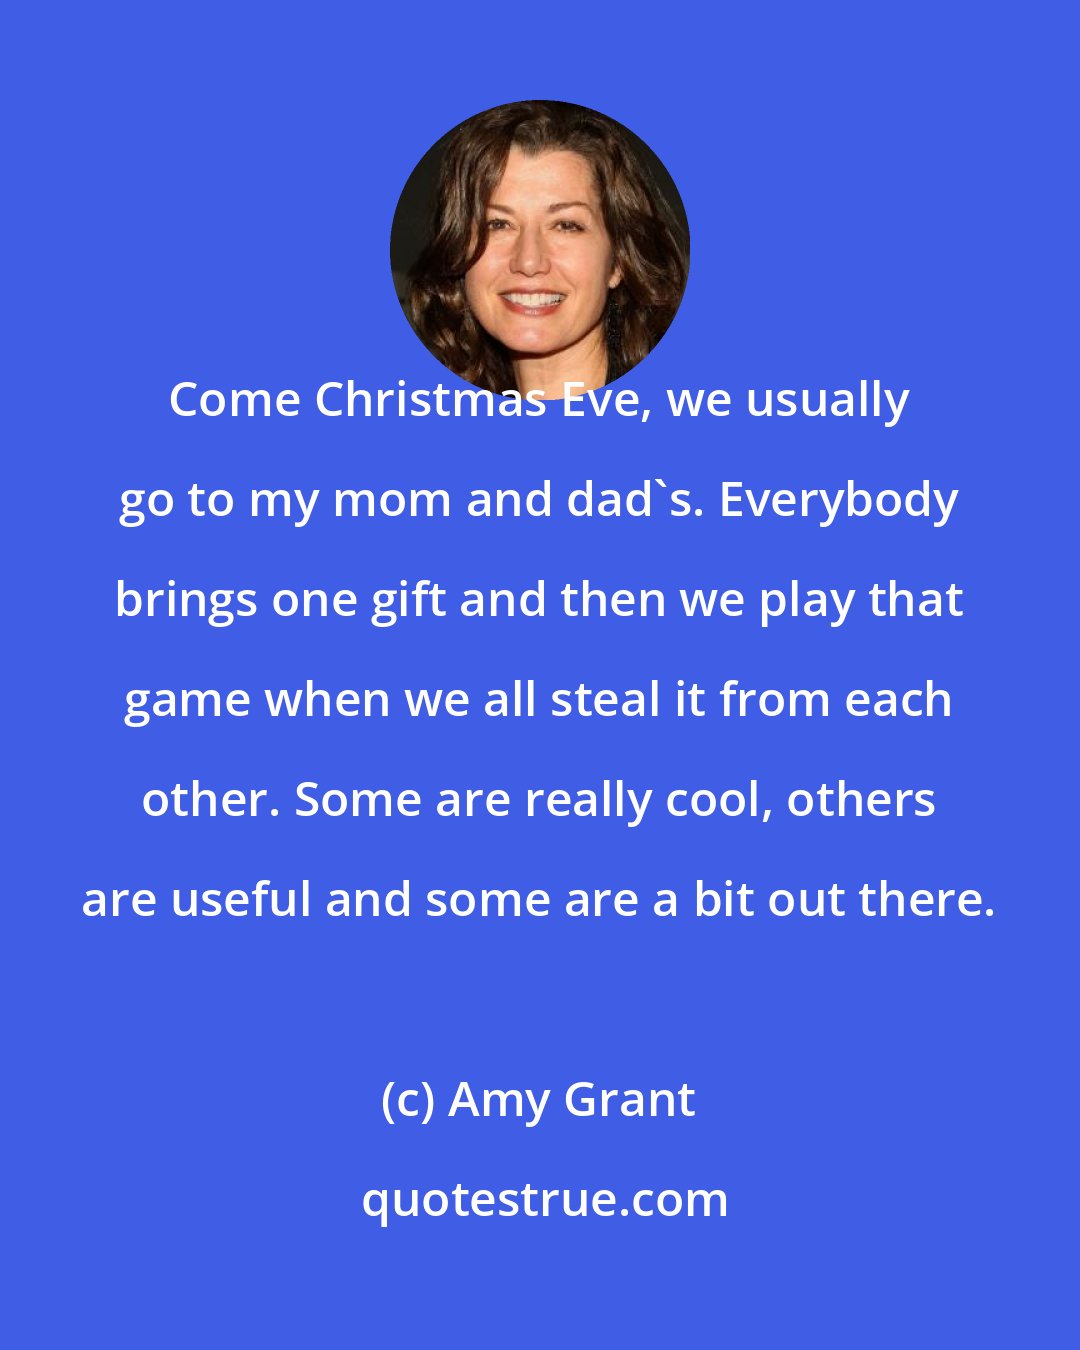 Amy Grant: Come Christmas Eve, we usually go to my mom and dad's. Everybody brings one gift and then we play that game when we all steal it from each other. Some are really cool, others are useful and some are a bit out there.